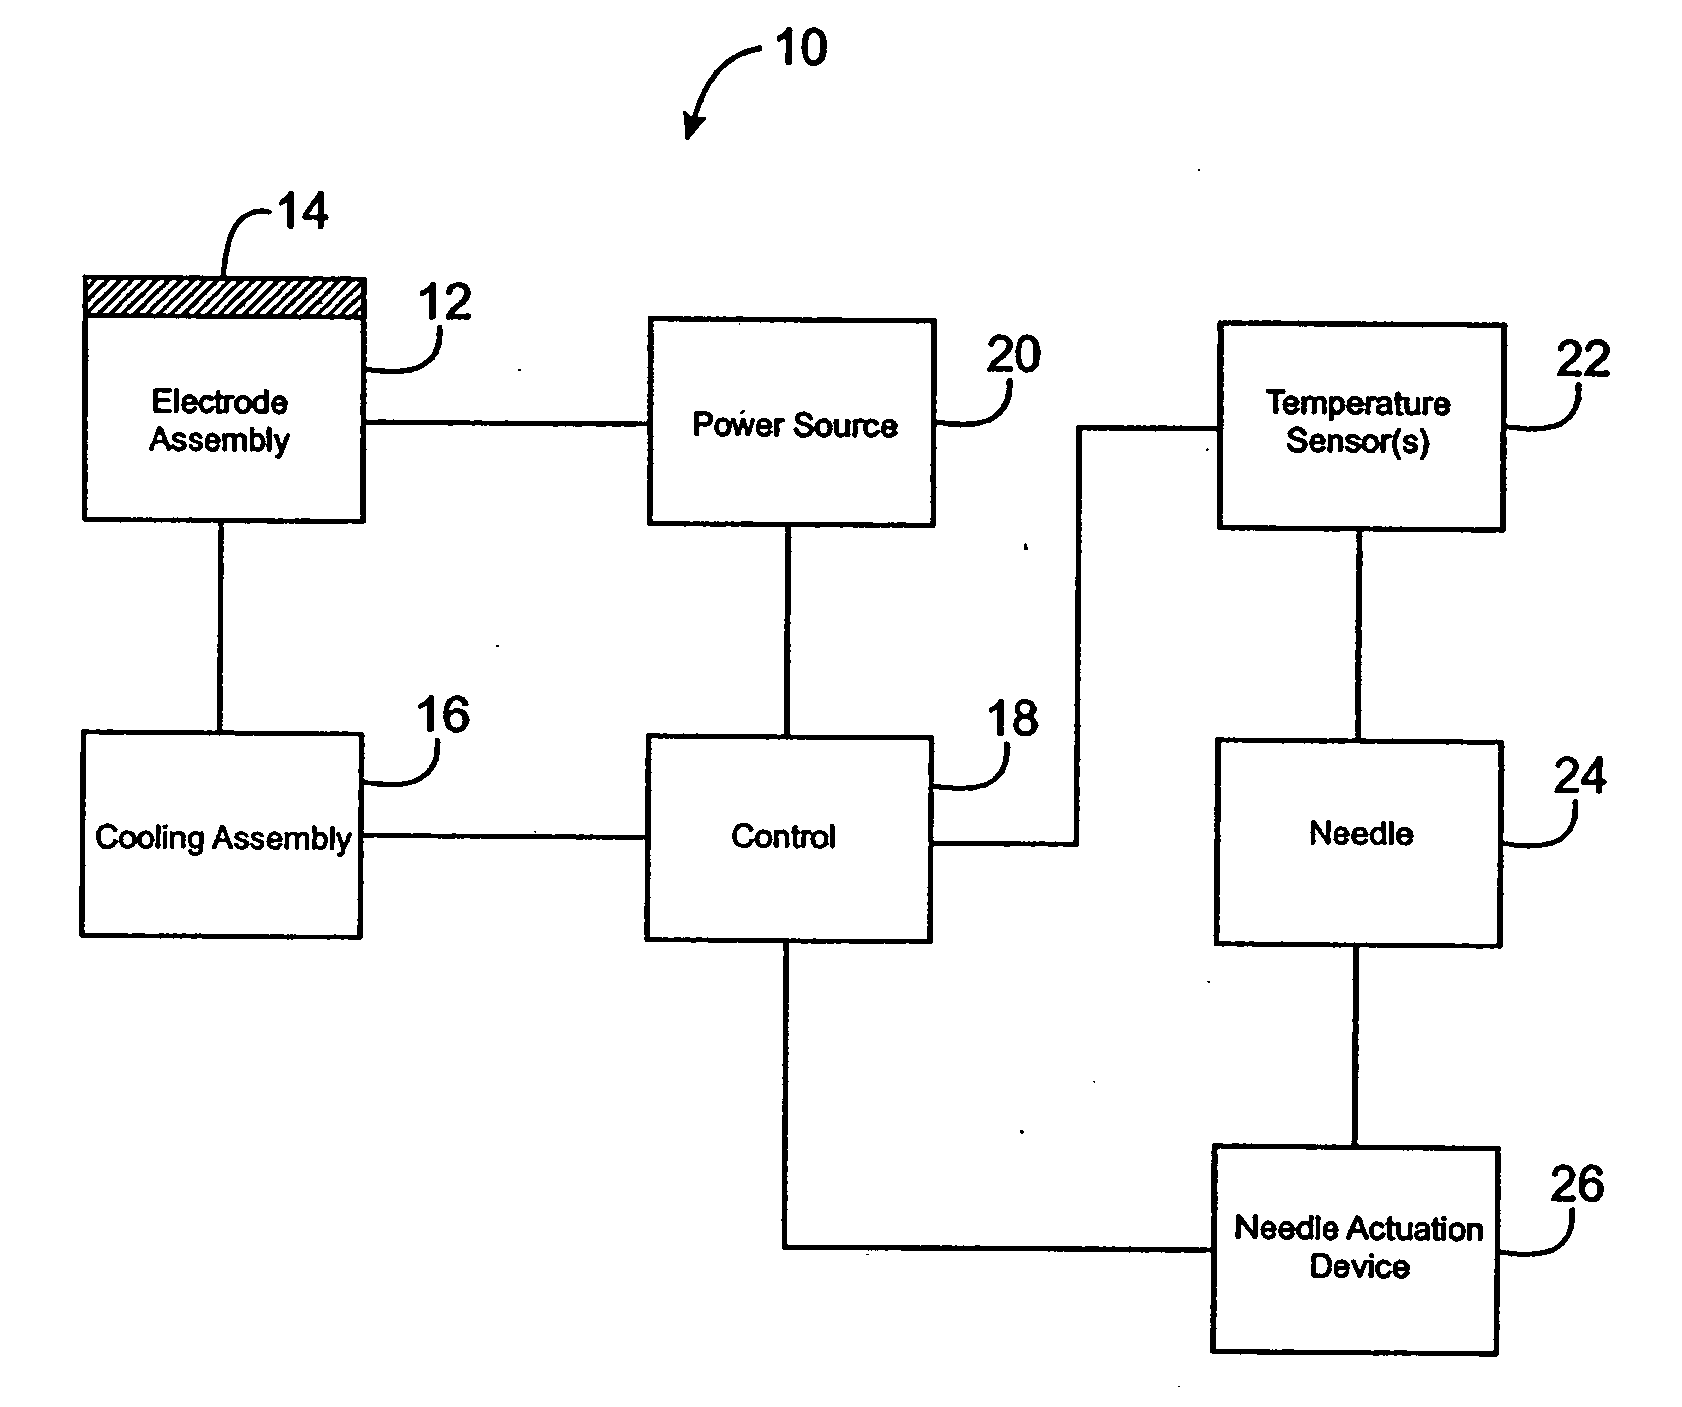 Electrically heated/phase change probe temperature control